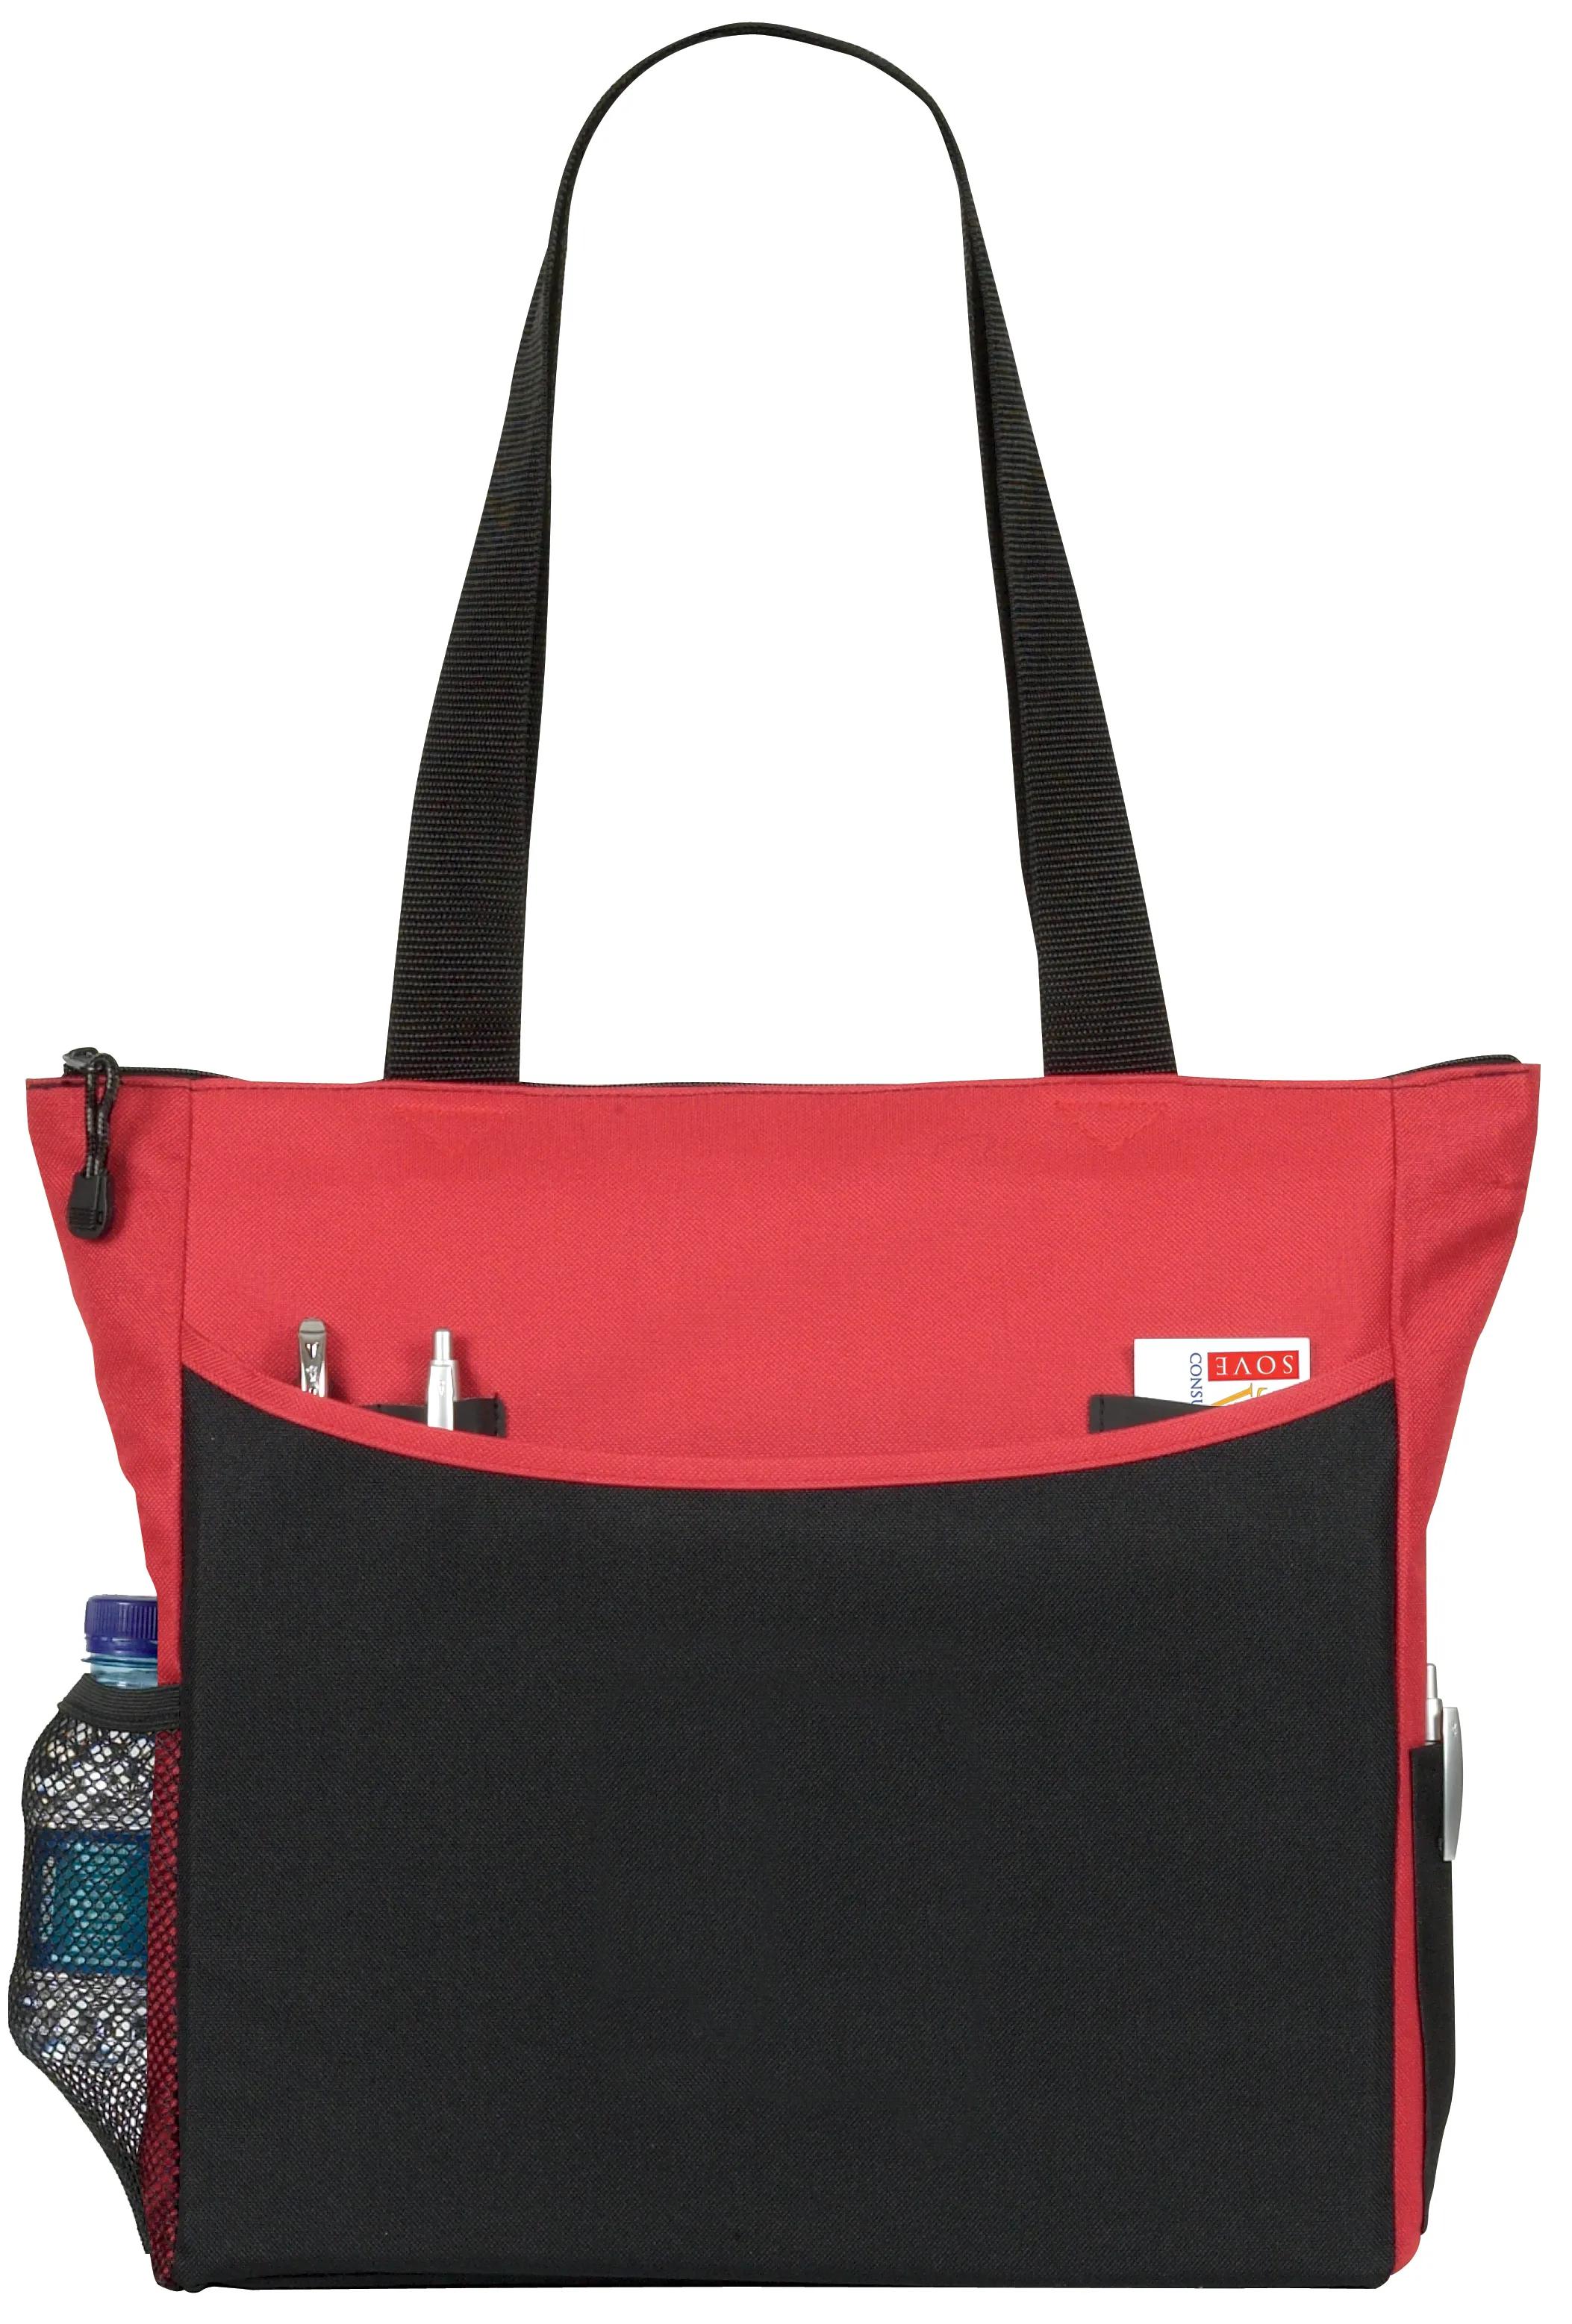 TranSport It Tote 9 of 40